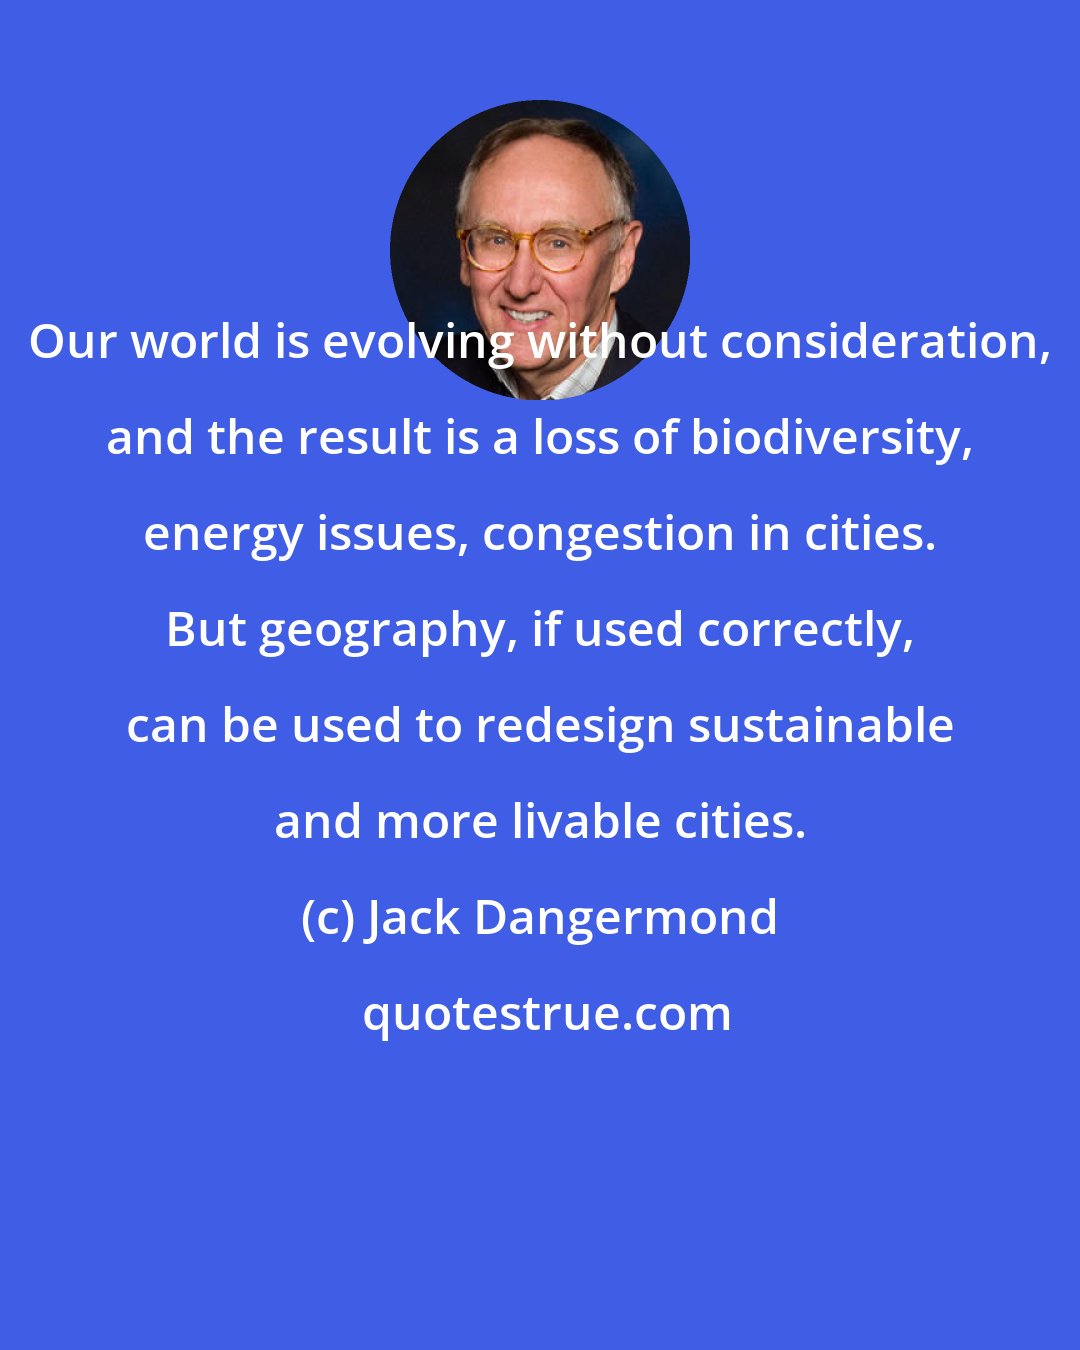 Jack Dangermond: Our world is evolving without consideration, and the result is a loss of biodiversity, energy issues, congestion in cities. But geography, if used correctly, can be used to redesign sustainable and more livable cities.